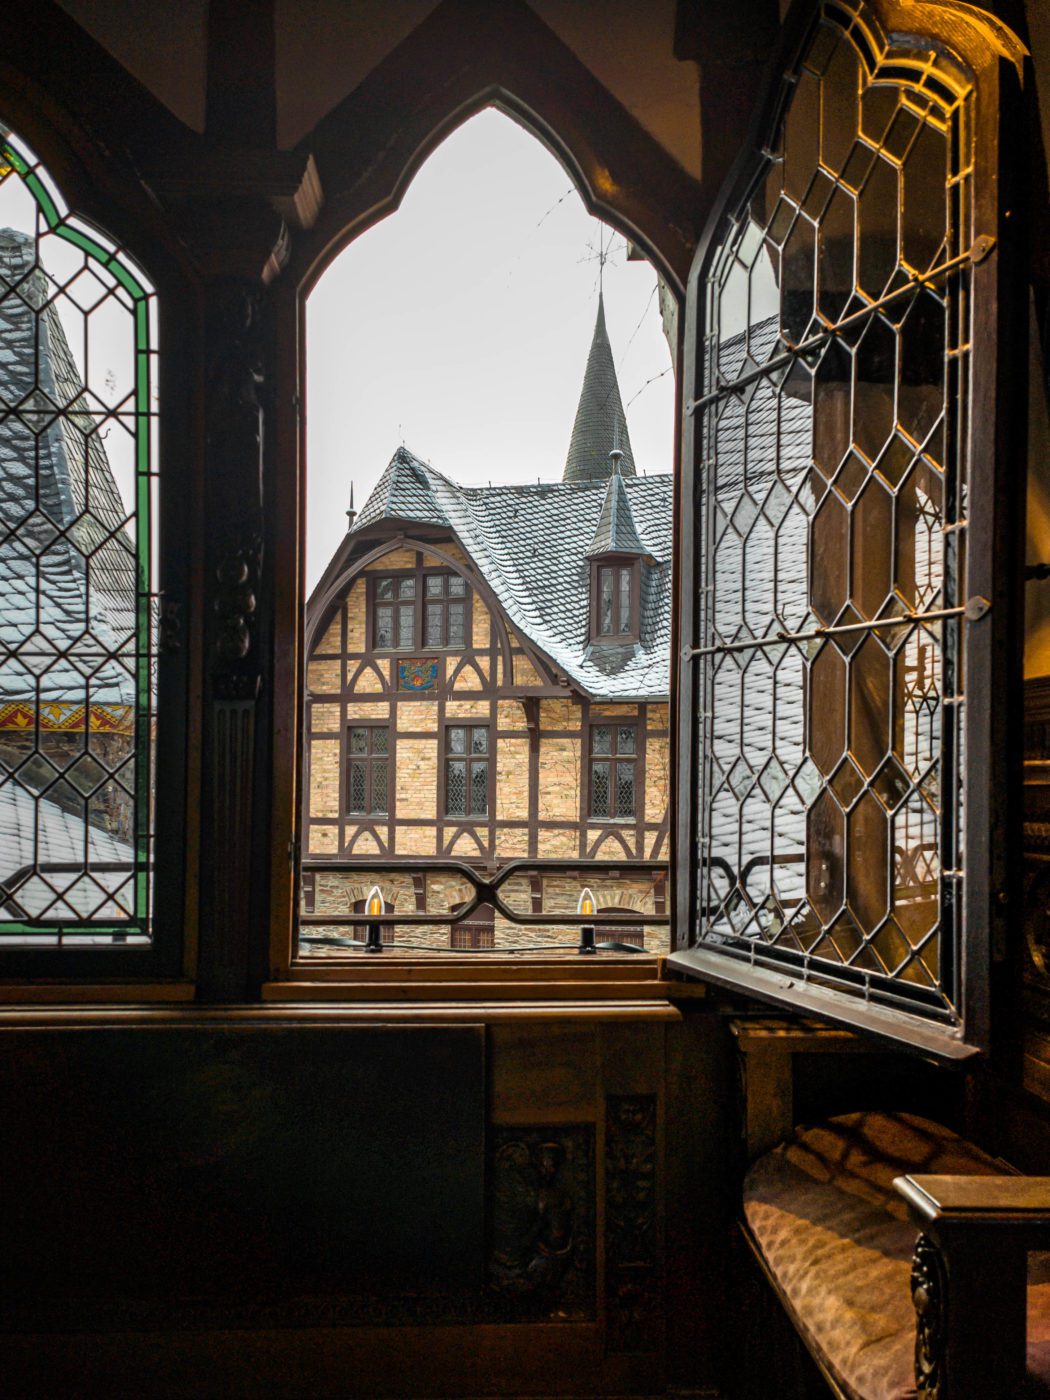 View from inside the Reichsburg in Cochem, Germany